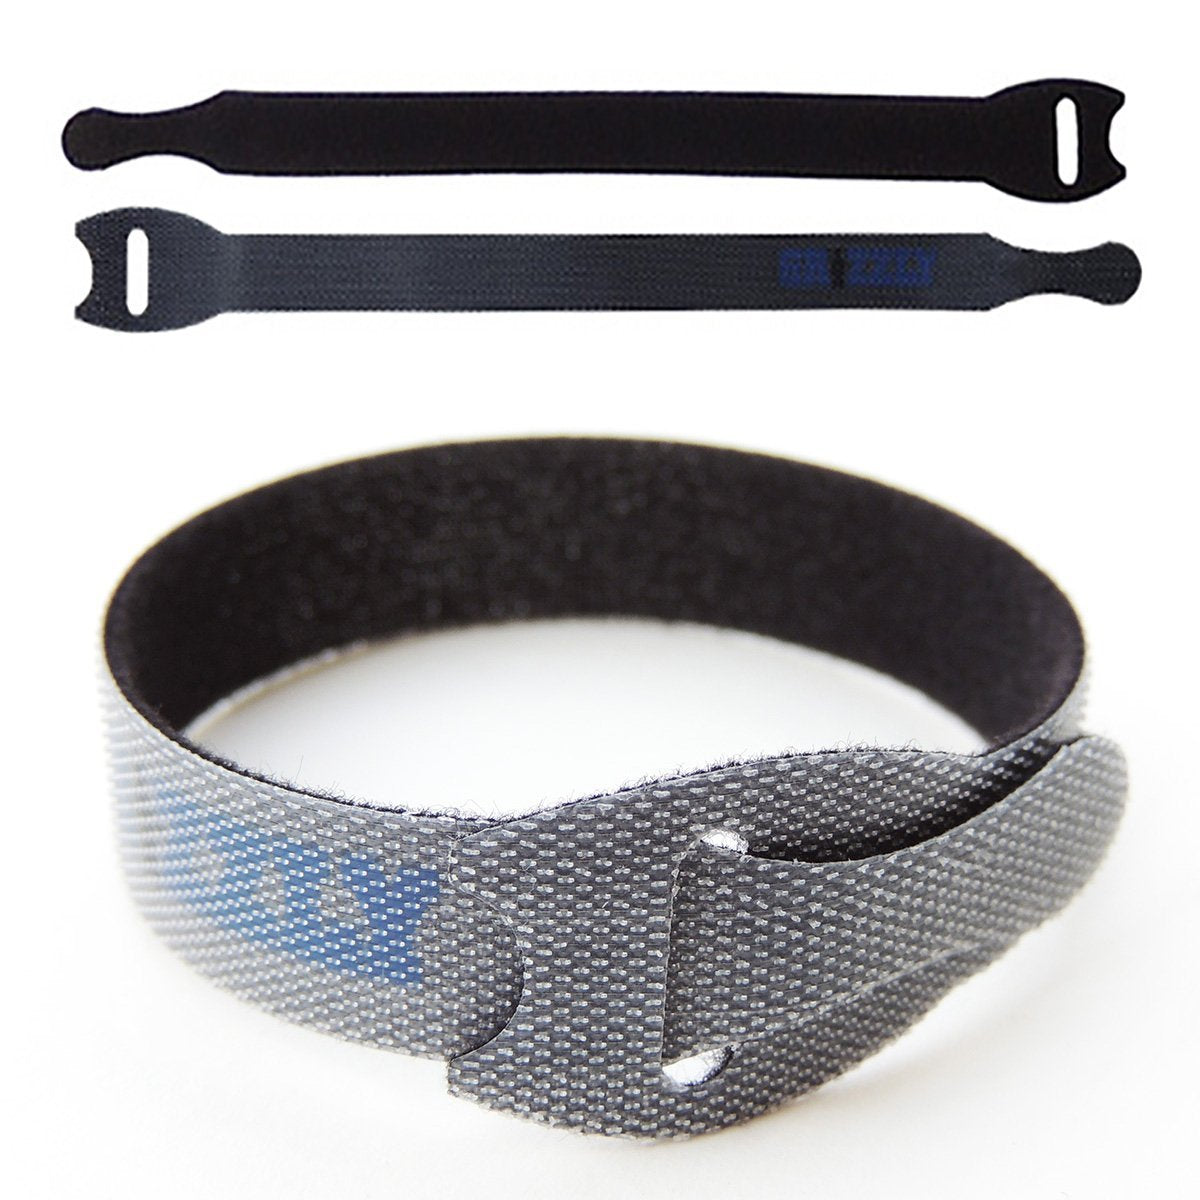 Cinch Straps, Reusable Black Nylon Cable/Securing Straps, 1 inch